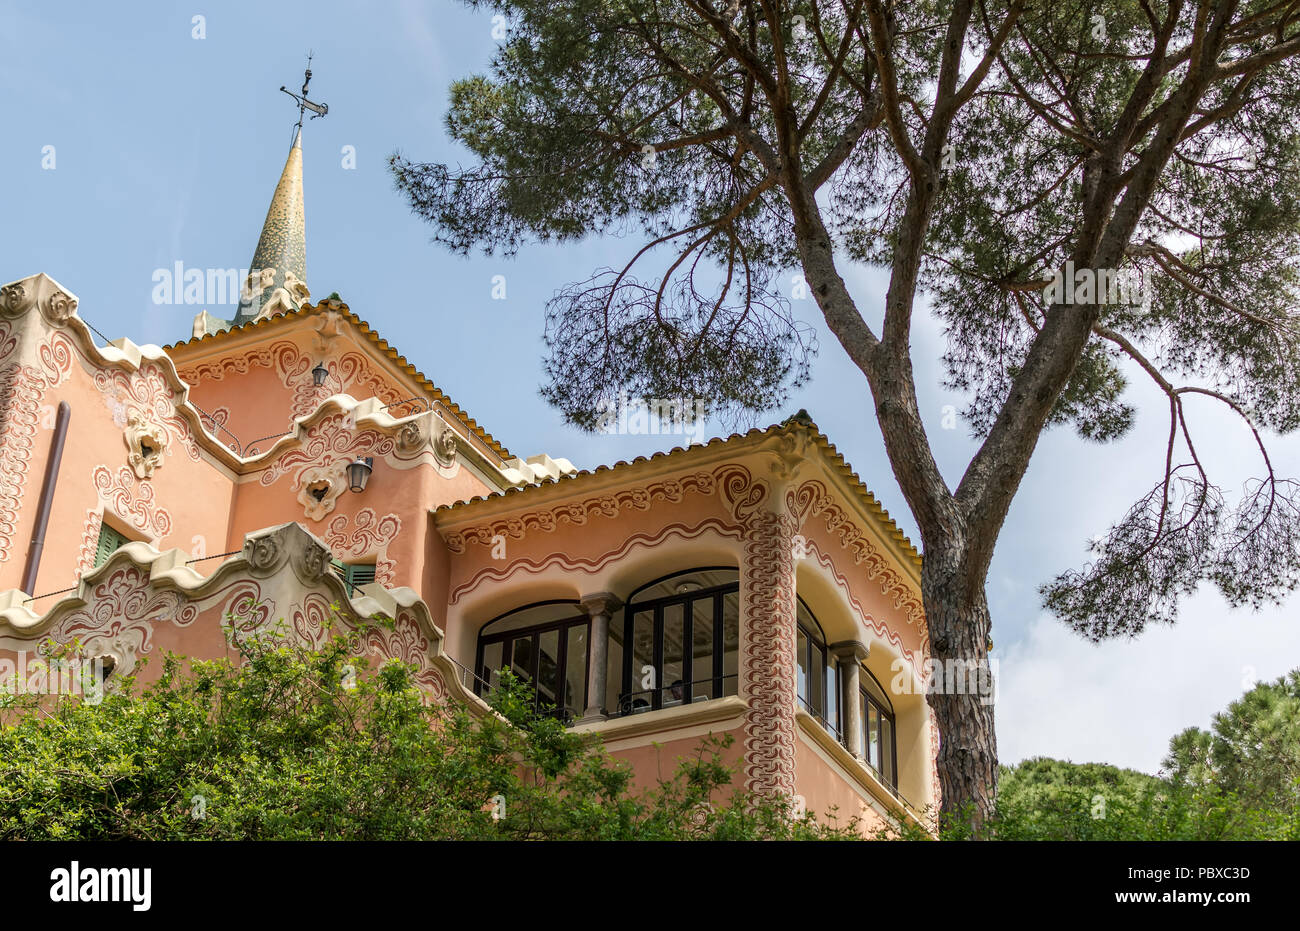 Gaudi House-Museum, named “Torre Rosa”, located within the Park Guell in Barcelona, Spain. Gaudi House is now open to the public as a museum Stock Photo